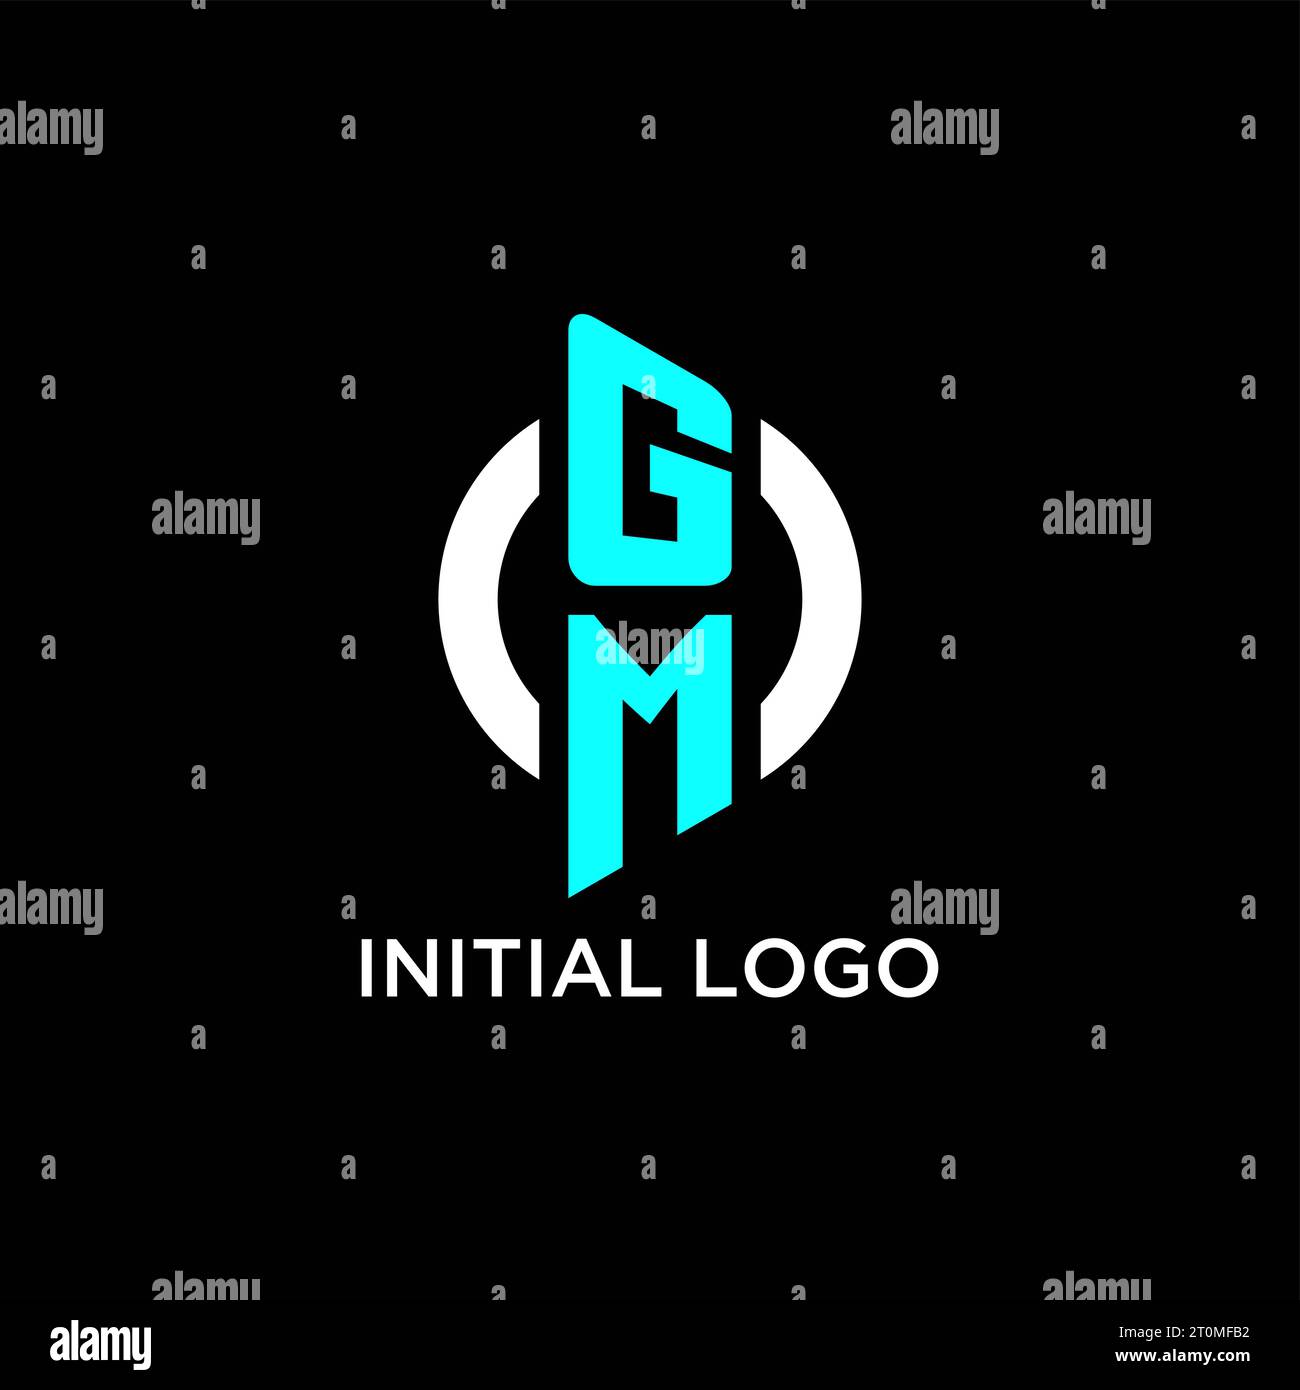 Design Inspiration For Companies From The Initial Letters Of The GM Icon.  Royalty Free SVG, Cliparts, Vectors, and Stock Illustration. Image  152031772.